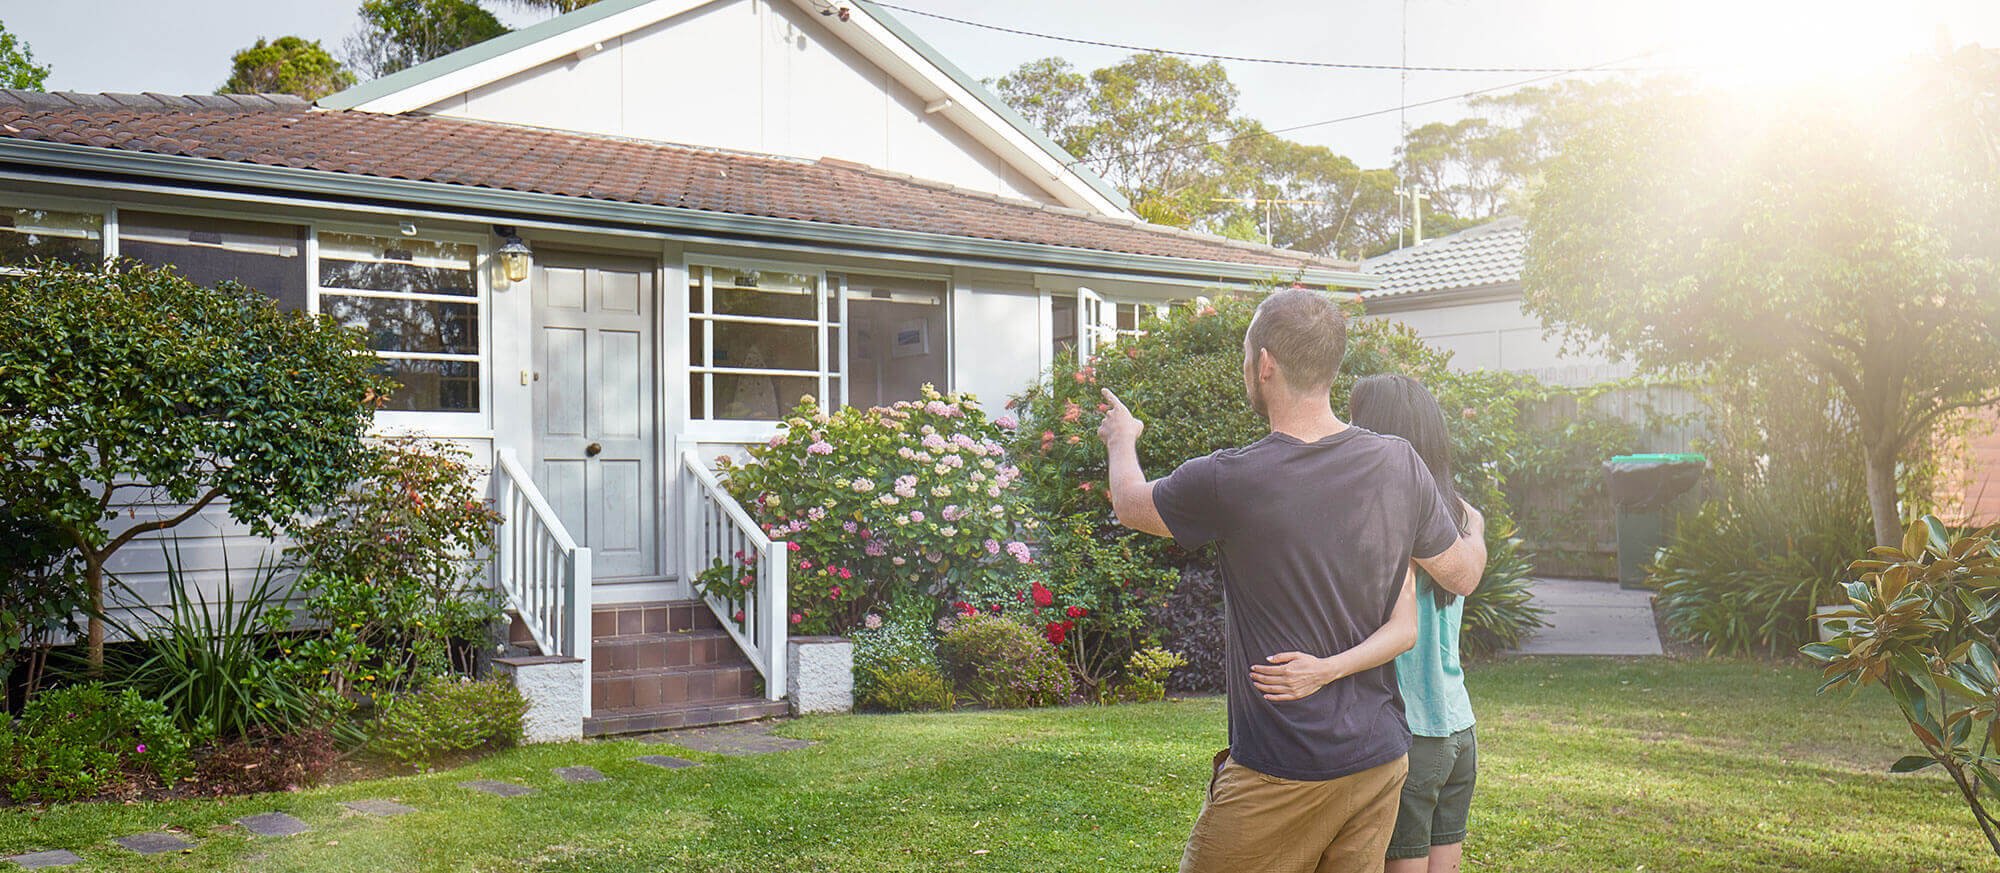 couple pointing at house